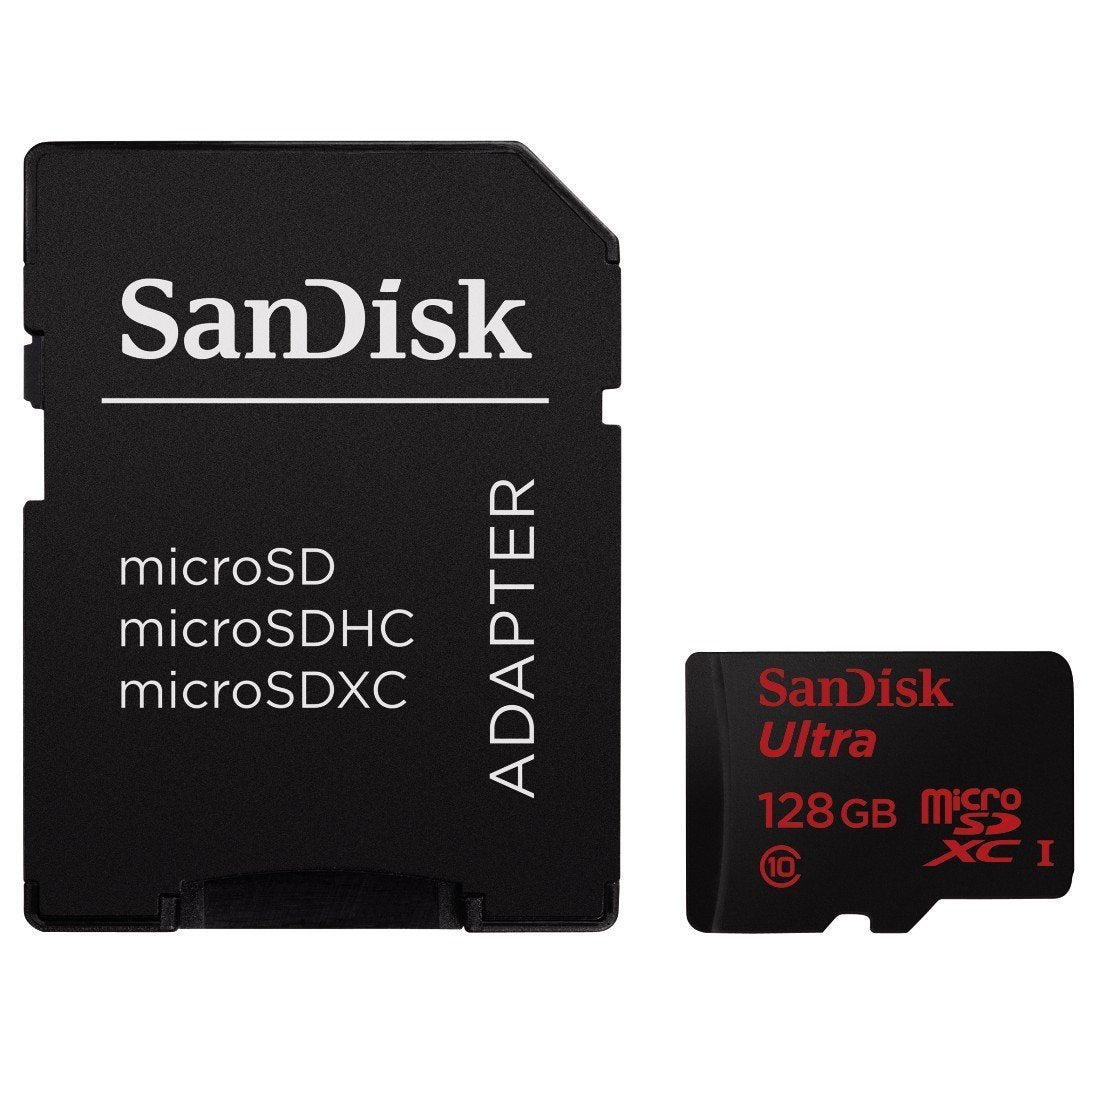 SanDisk Ultra 128GB UHS-I/Class 10 Micro SDXC Memory Card With Adapter- SDSDQUAN-128G-AFFP (Frustration Free Packaging)